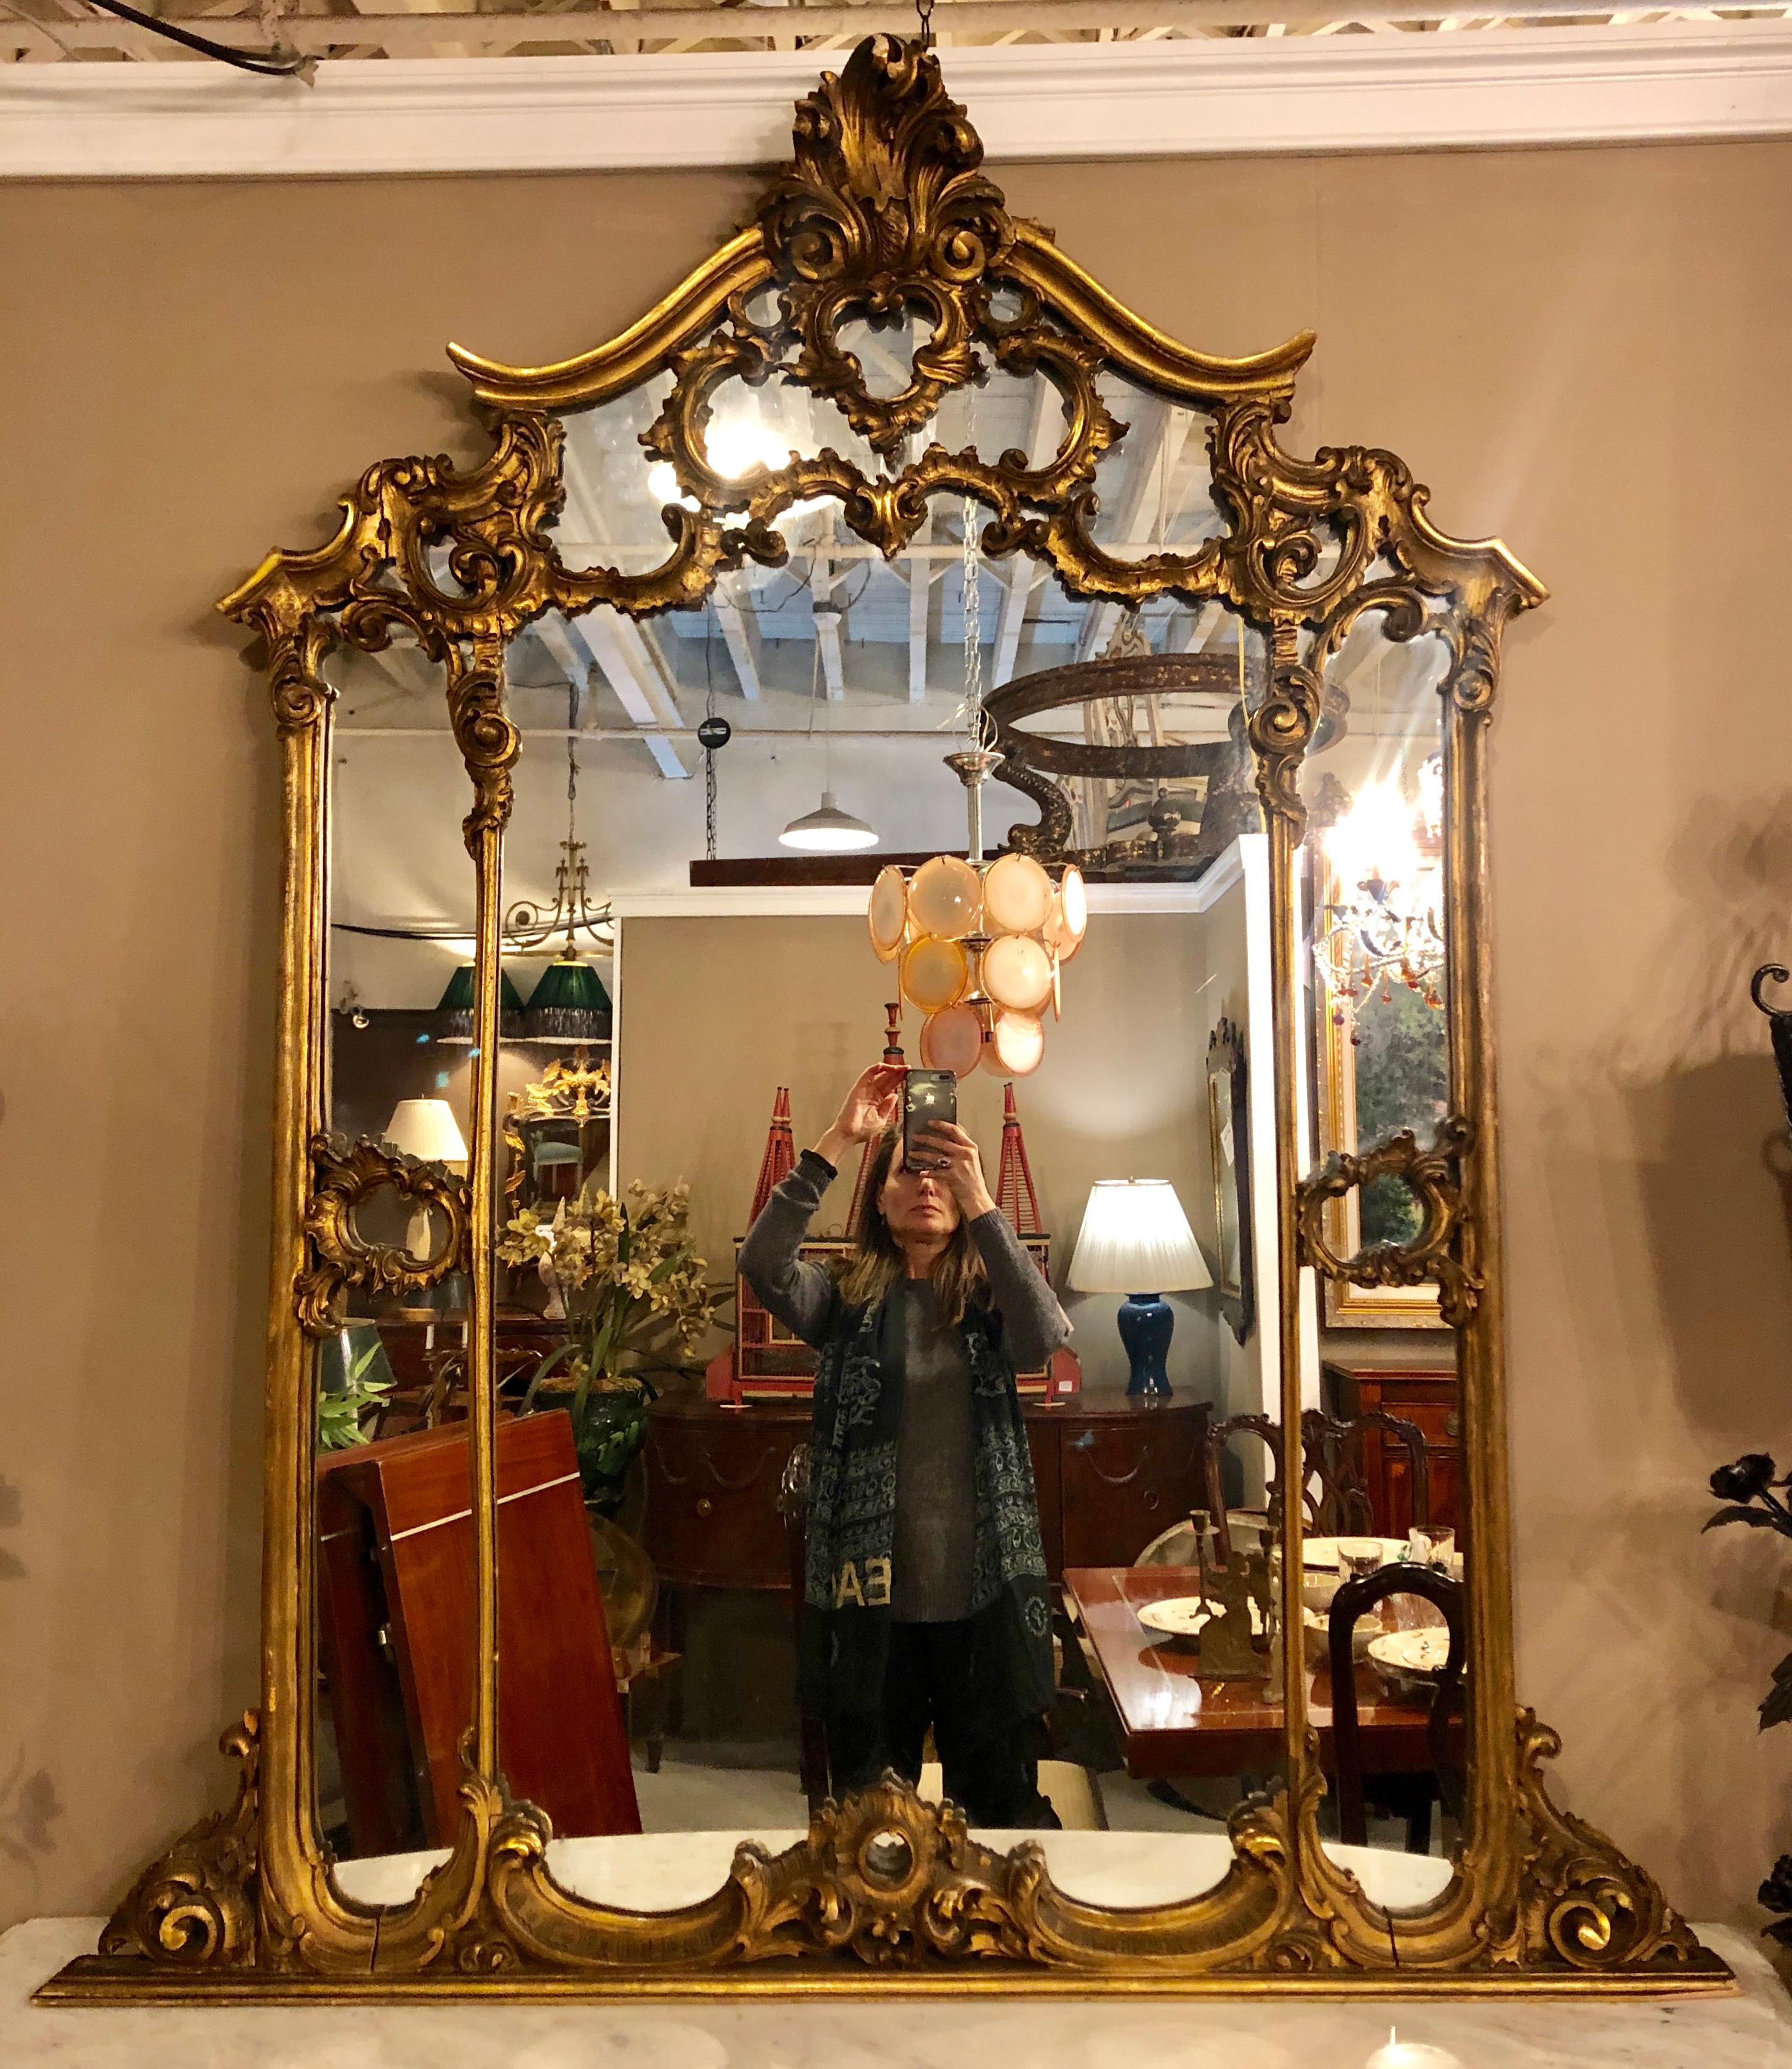 A large carved Louis XVI style French gilt gold over the mantle or wall mirror. This finely carved and impressive gilt gold wall, console or over the mantle mirror is simply stunning with its shell and scroll carvings giving the illusion of three